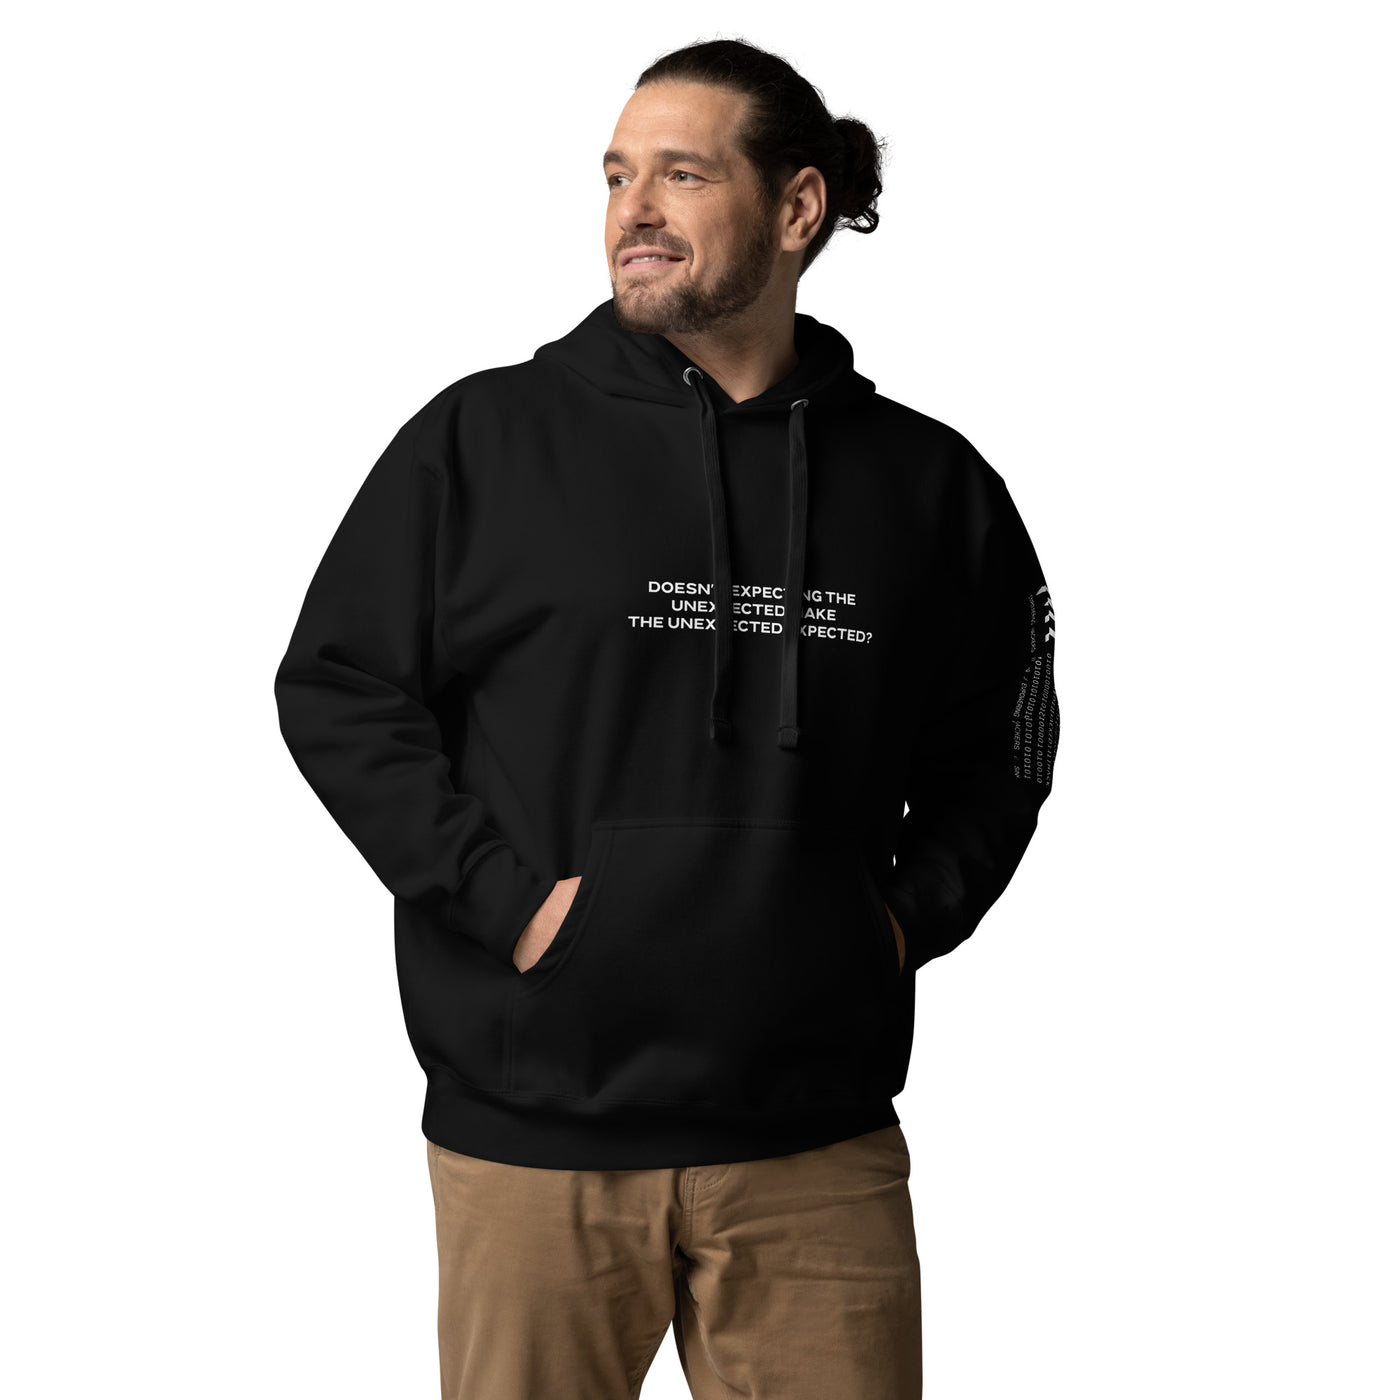 Doesn't expecting the unexpected make the unexpected expected V1 - Unisex Hoodie